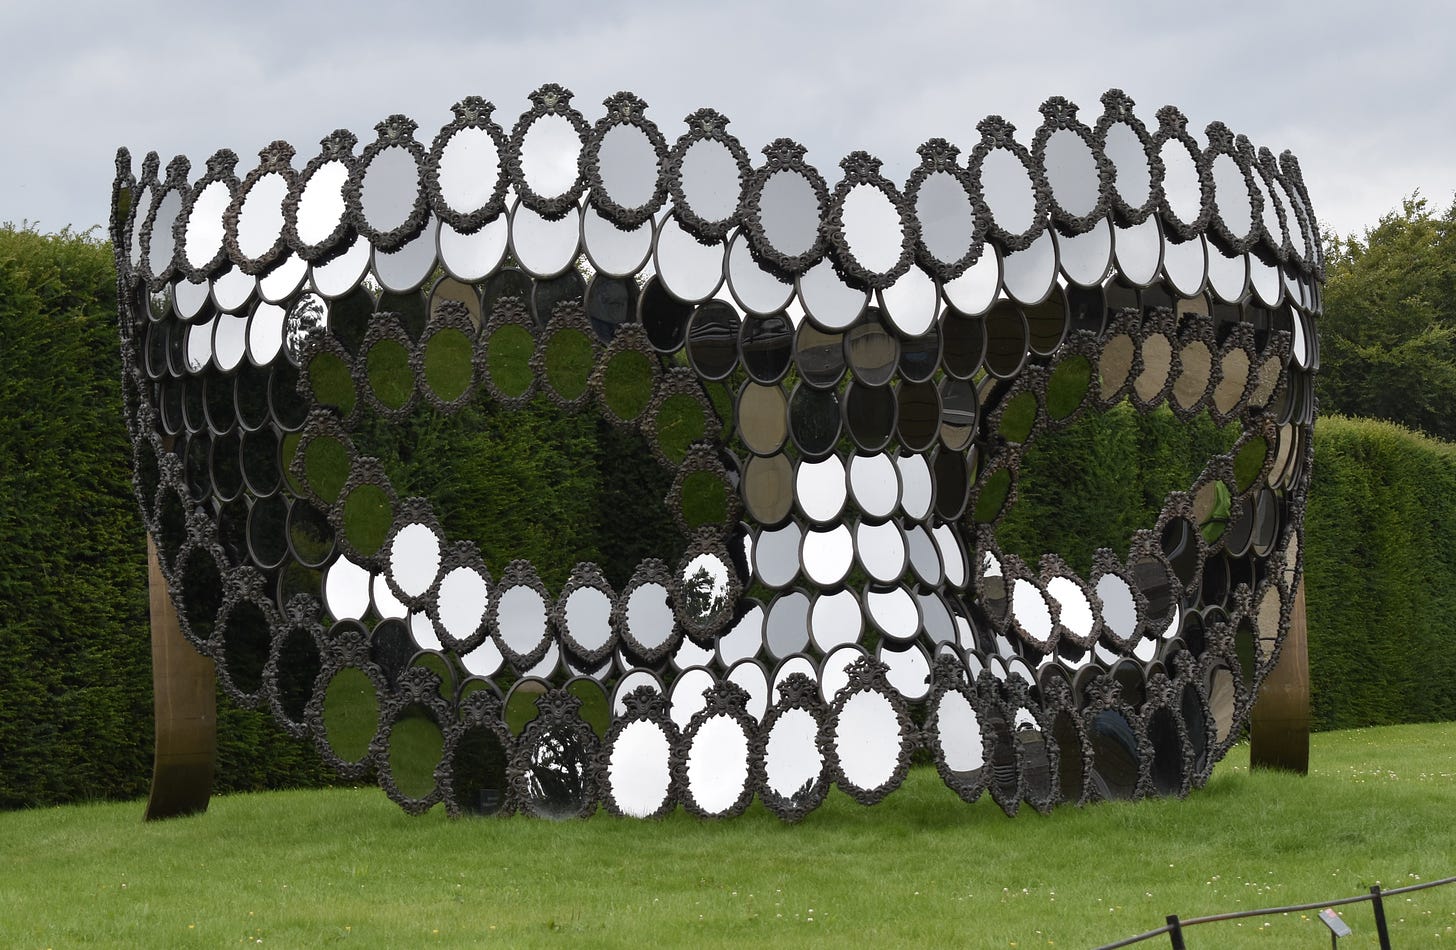 Sculpture of a mask made from mirrors